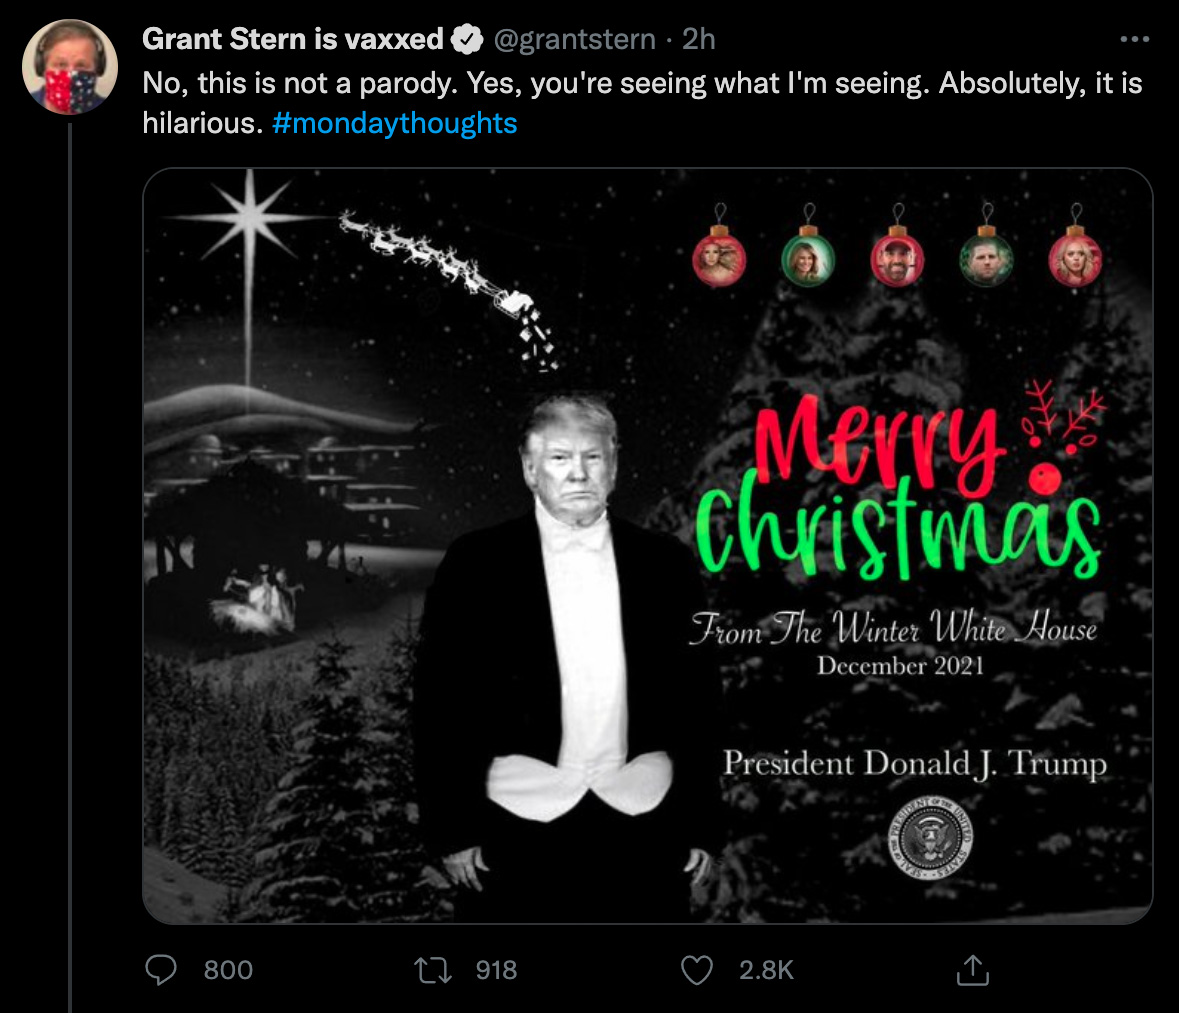 This phallic Christmas card featuring former President Donald Trump was not an official item from the family or his organization.